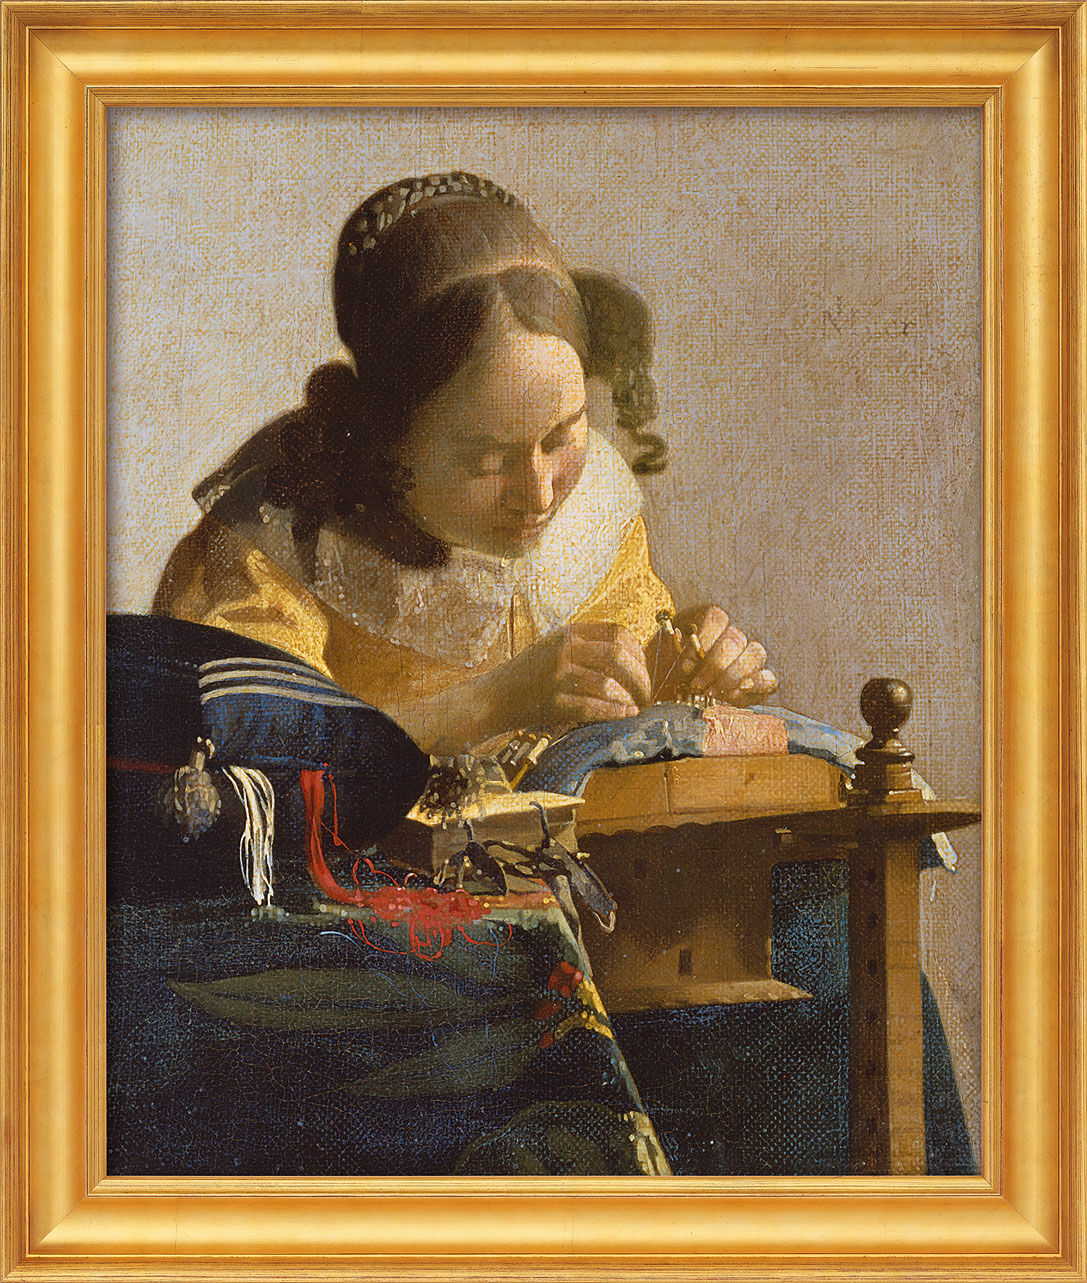 Picture "The Lacemaker" (1669-70), framed by Jan Vermeer van Delft